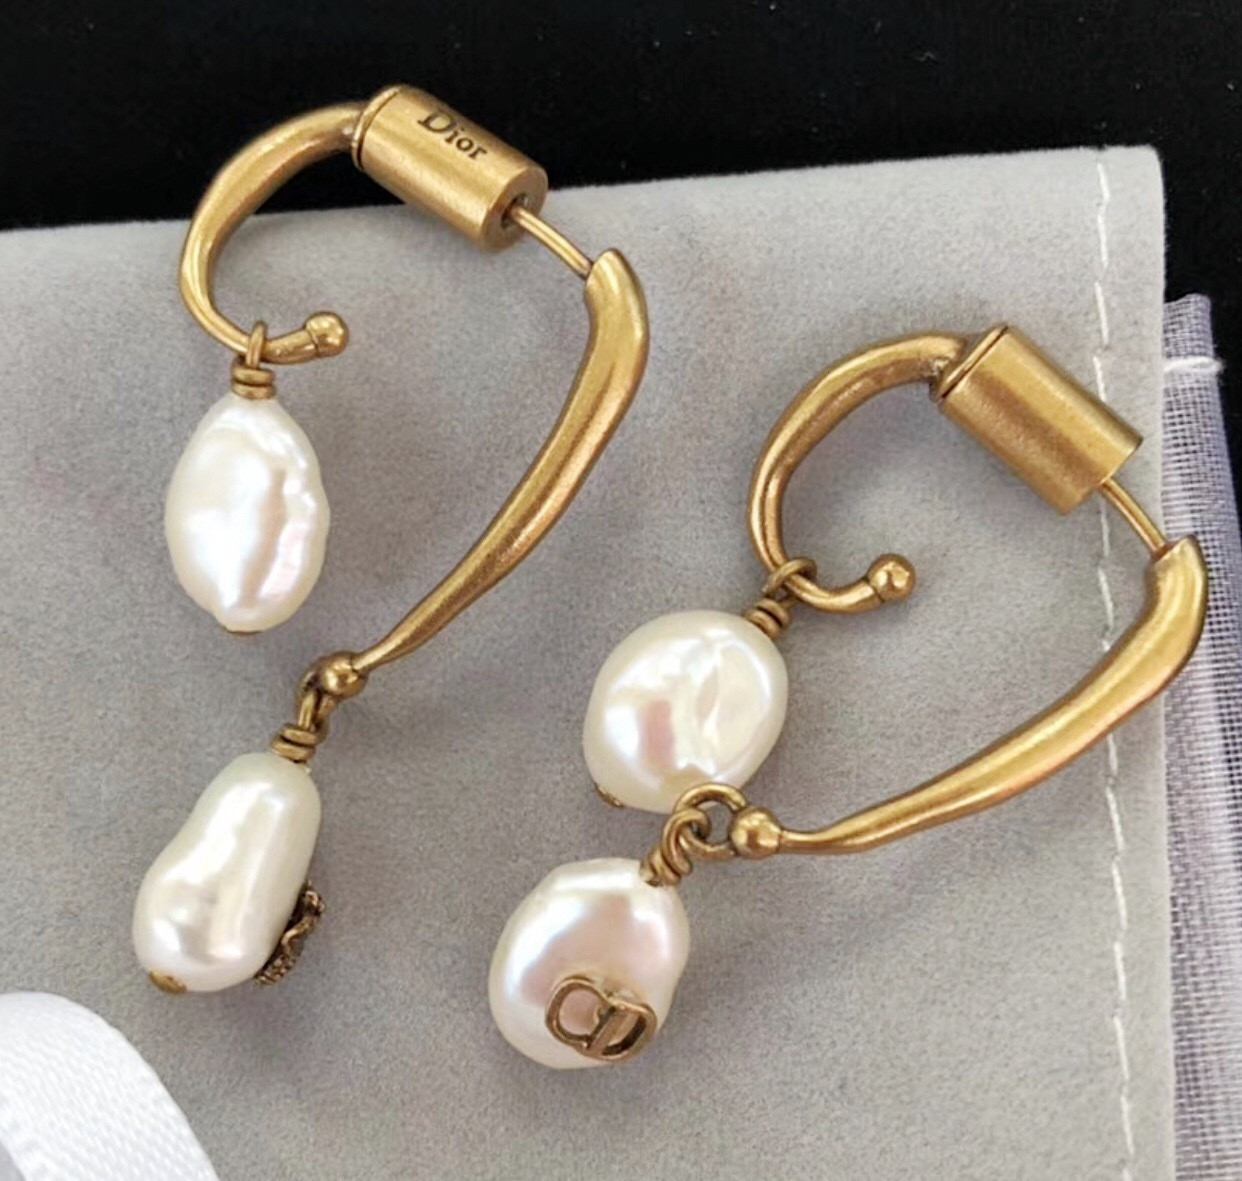 Dior Double Pearl Earrings
 Authentic Christian Dior 2019 Wasp Double Pearl Dangle